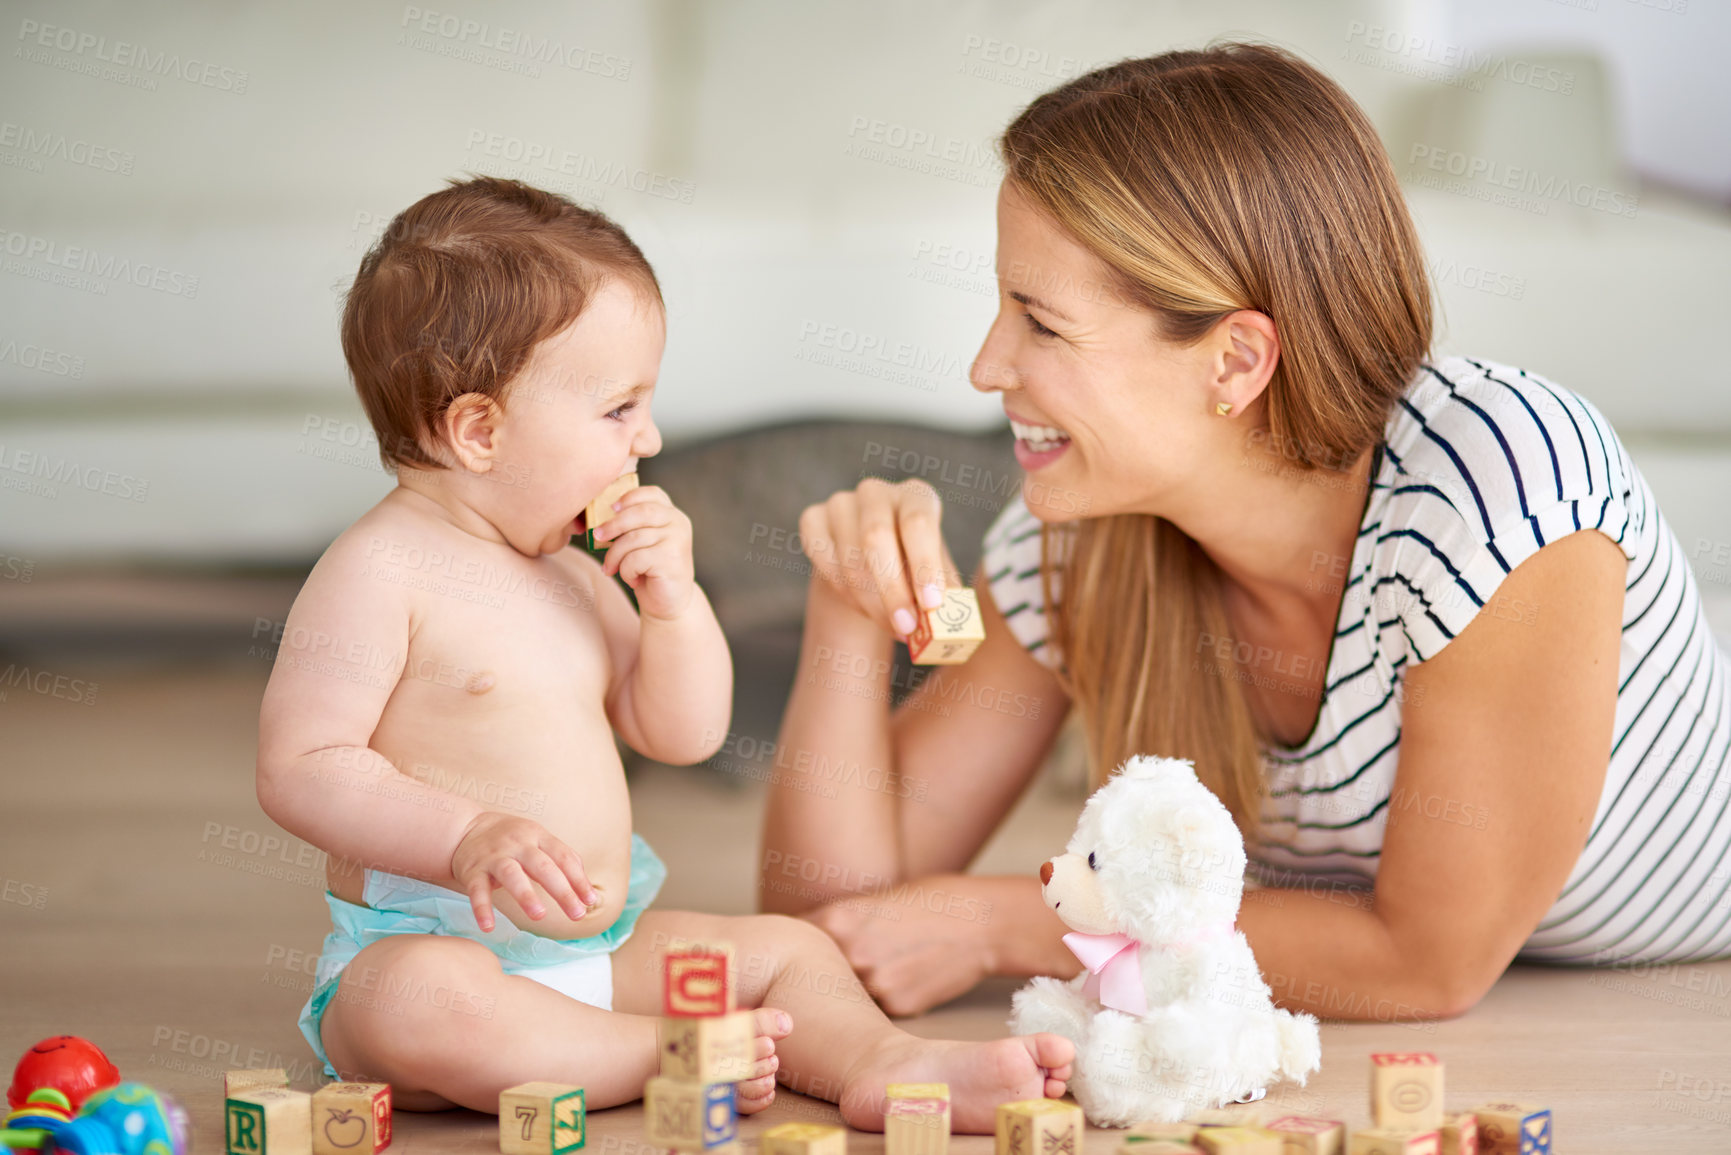 Buy stock photo Shot of an adorable baby girl and her mother playing with wooden blocks at home